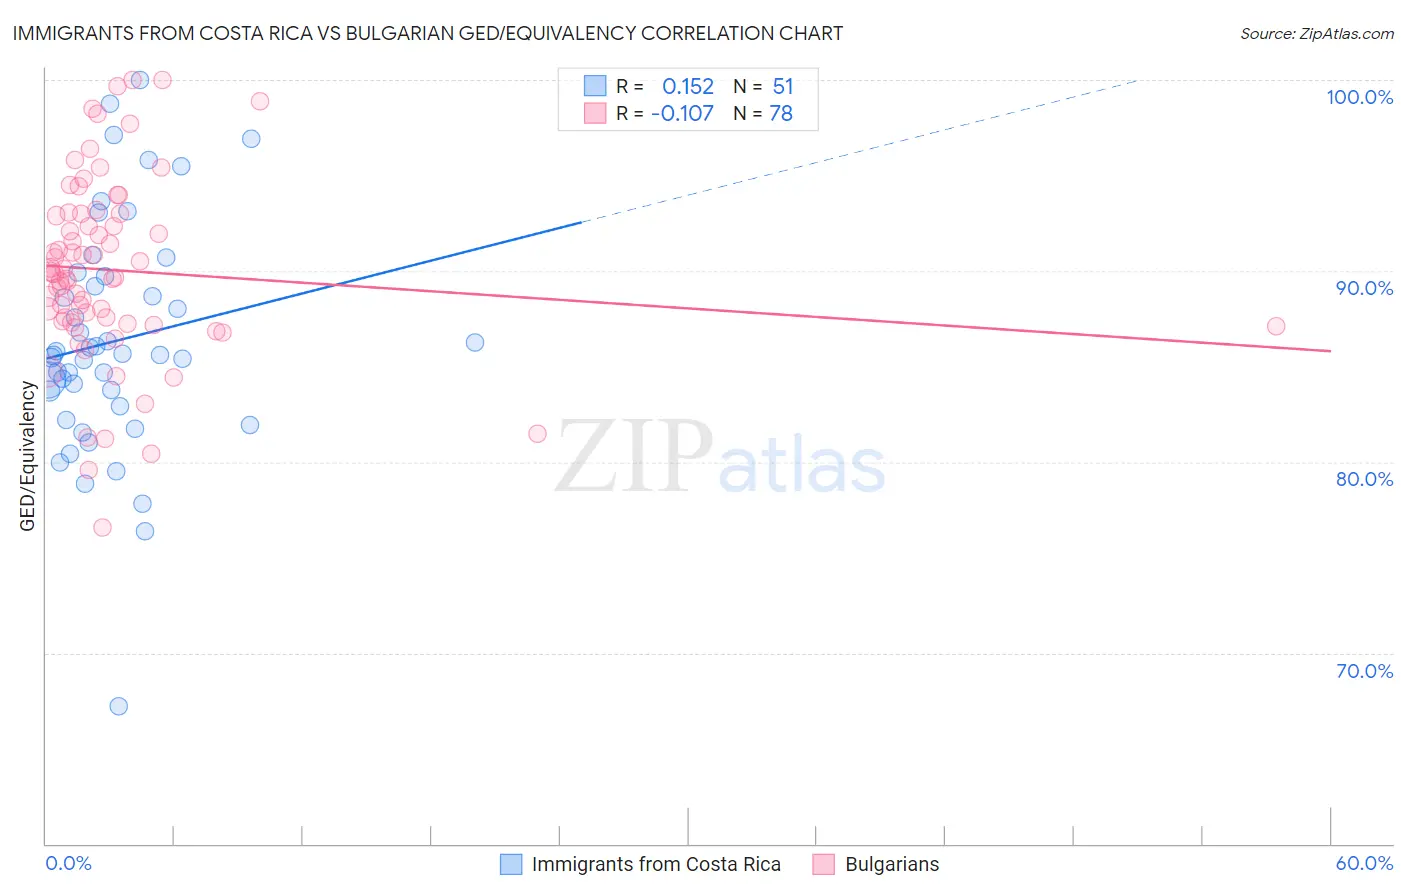 Immigrants from Costa Rica vs Bulgarian GED/Equivalency